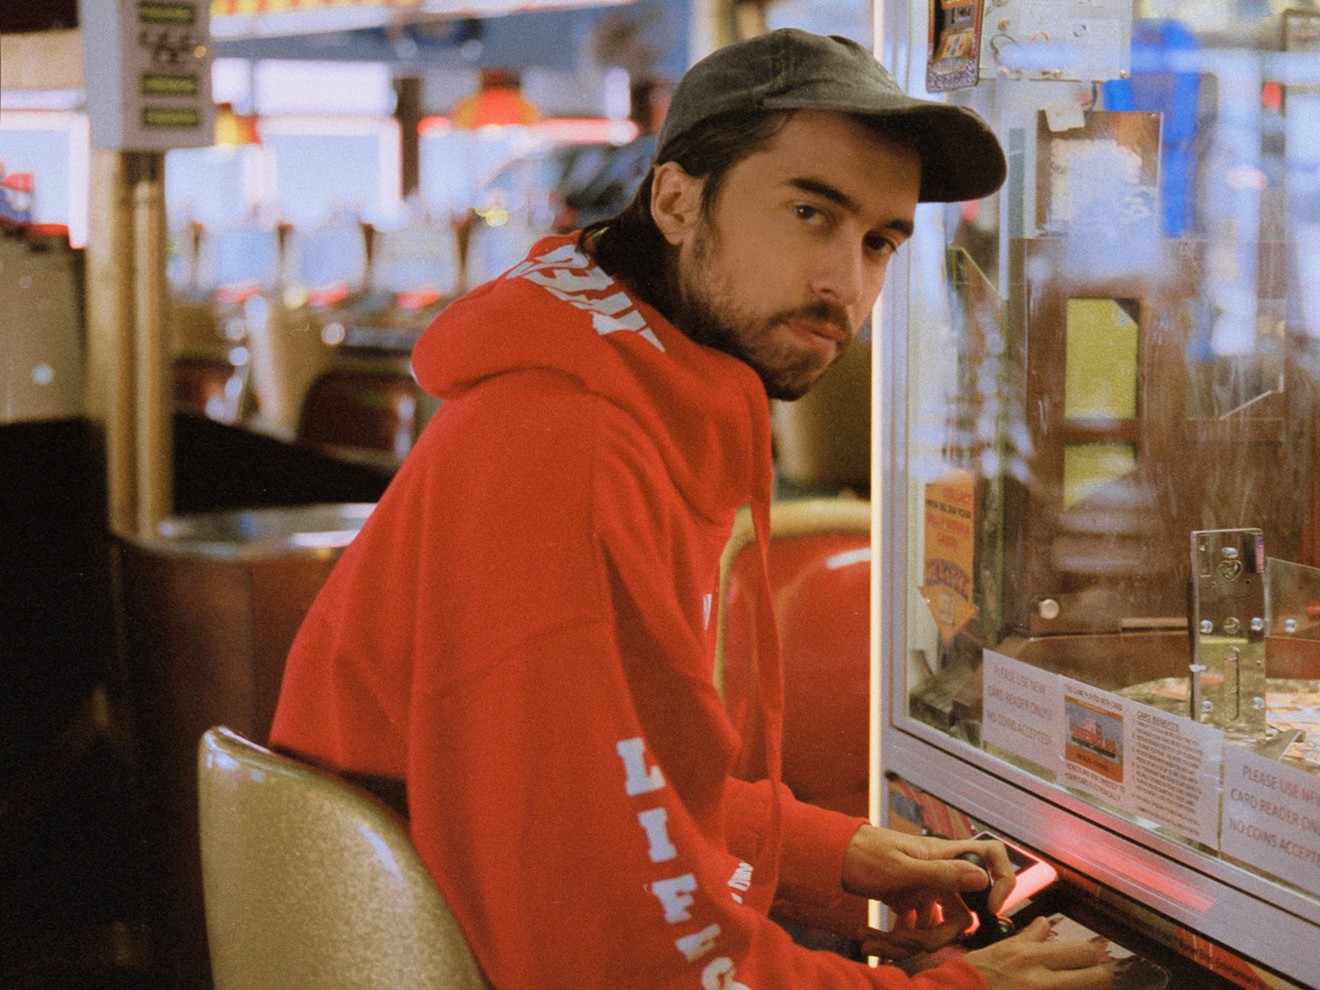 Alex G brings his House of Sugar to the Nile